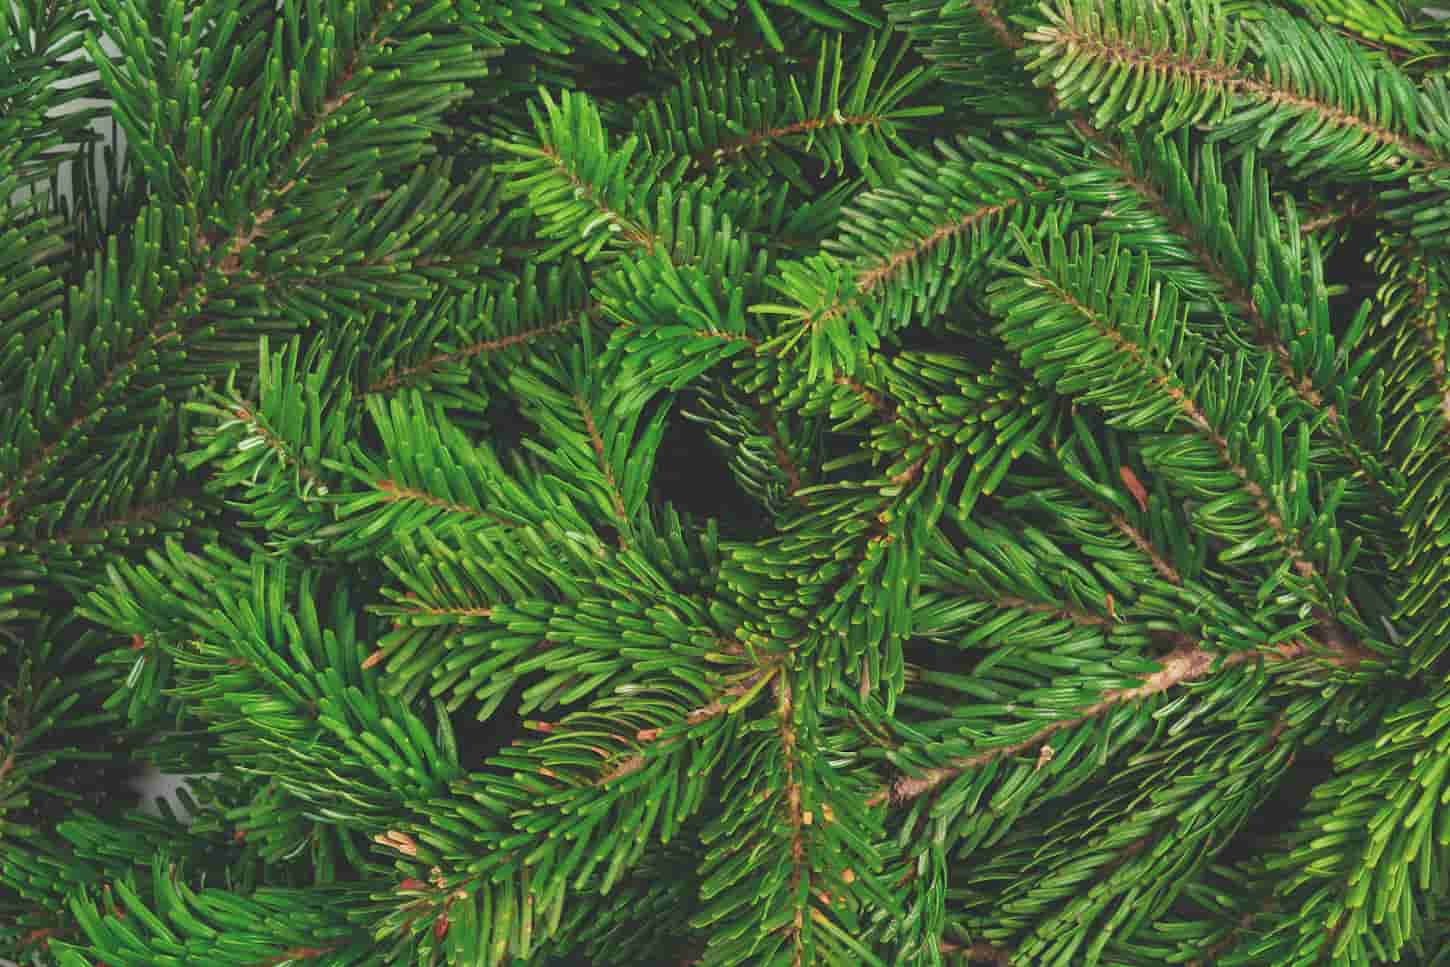 An image of pine tree branches pile close up as a background.